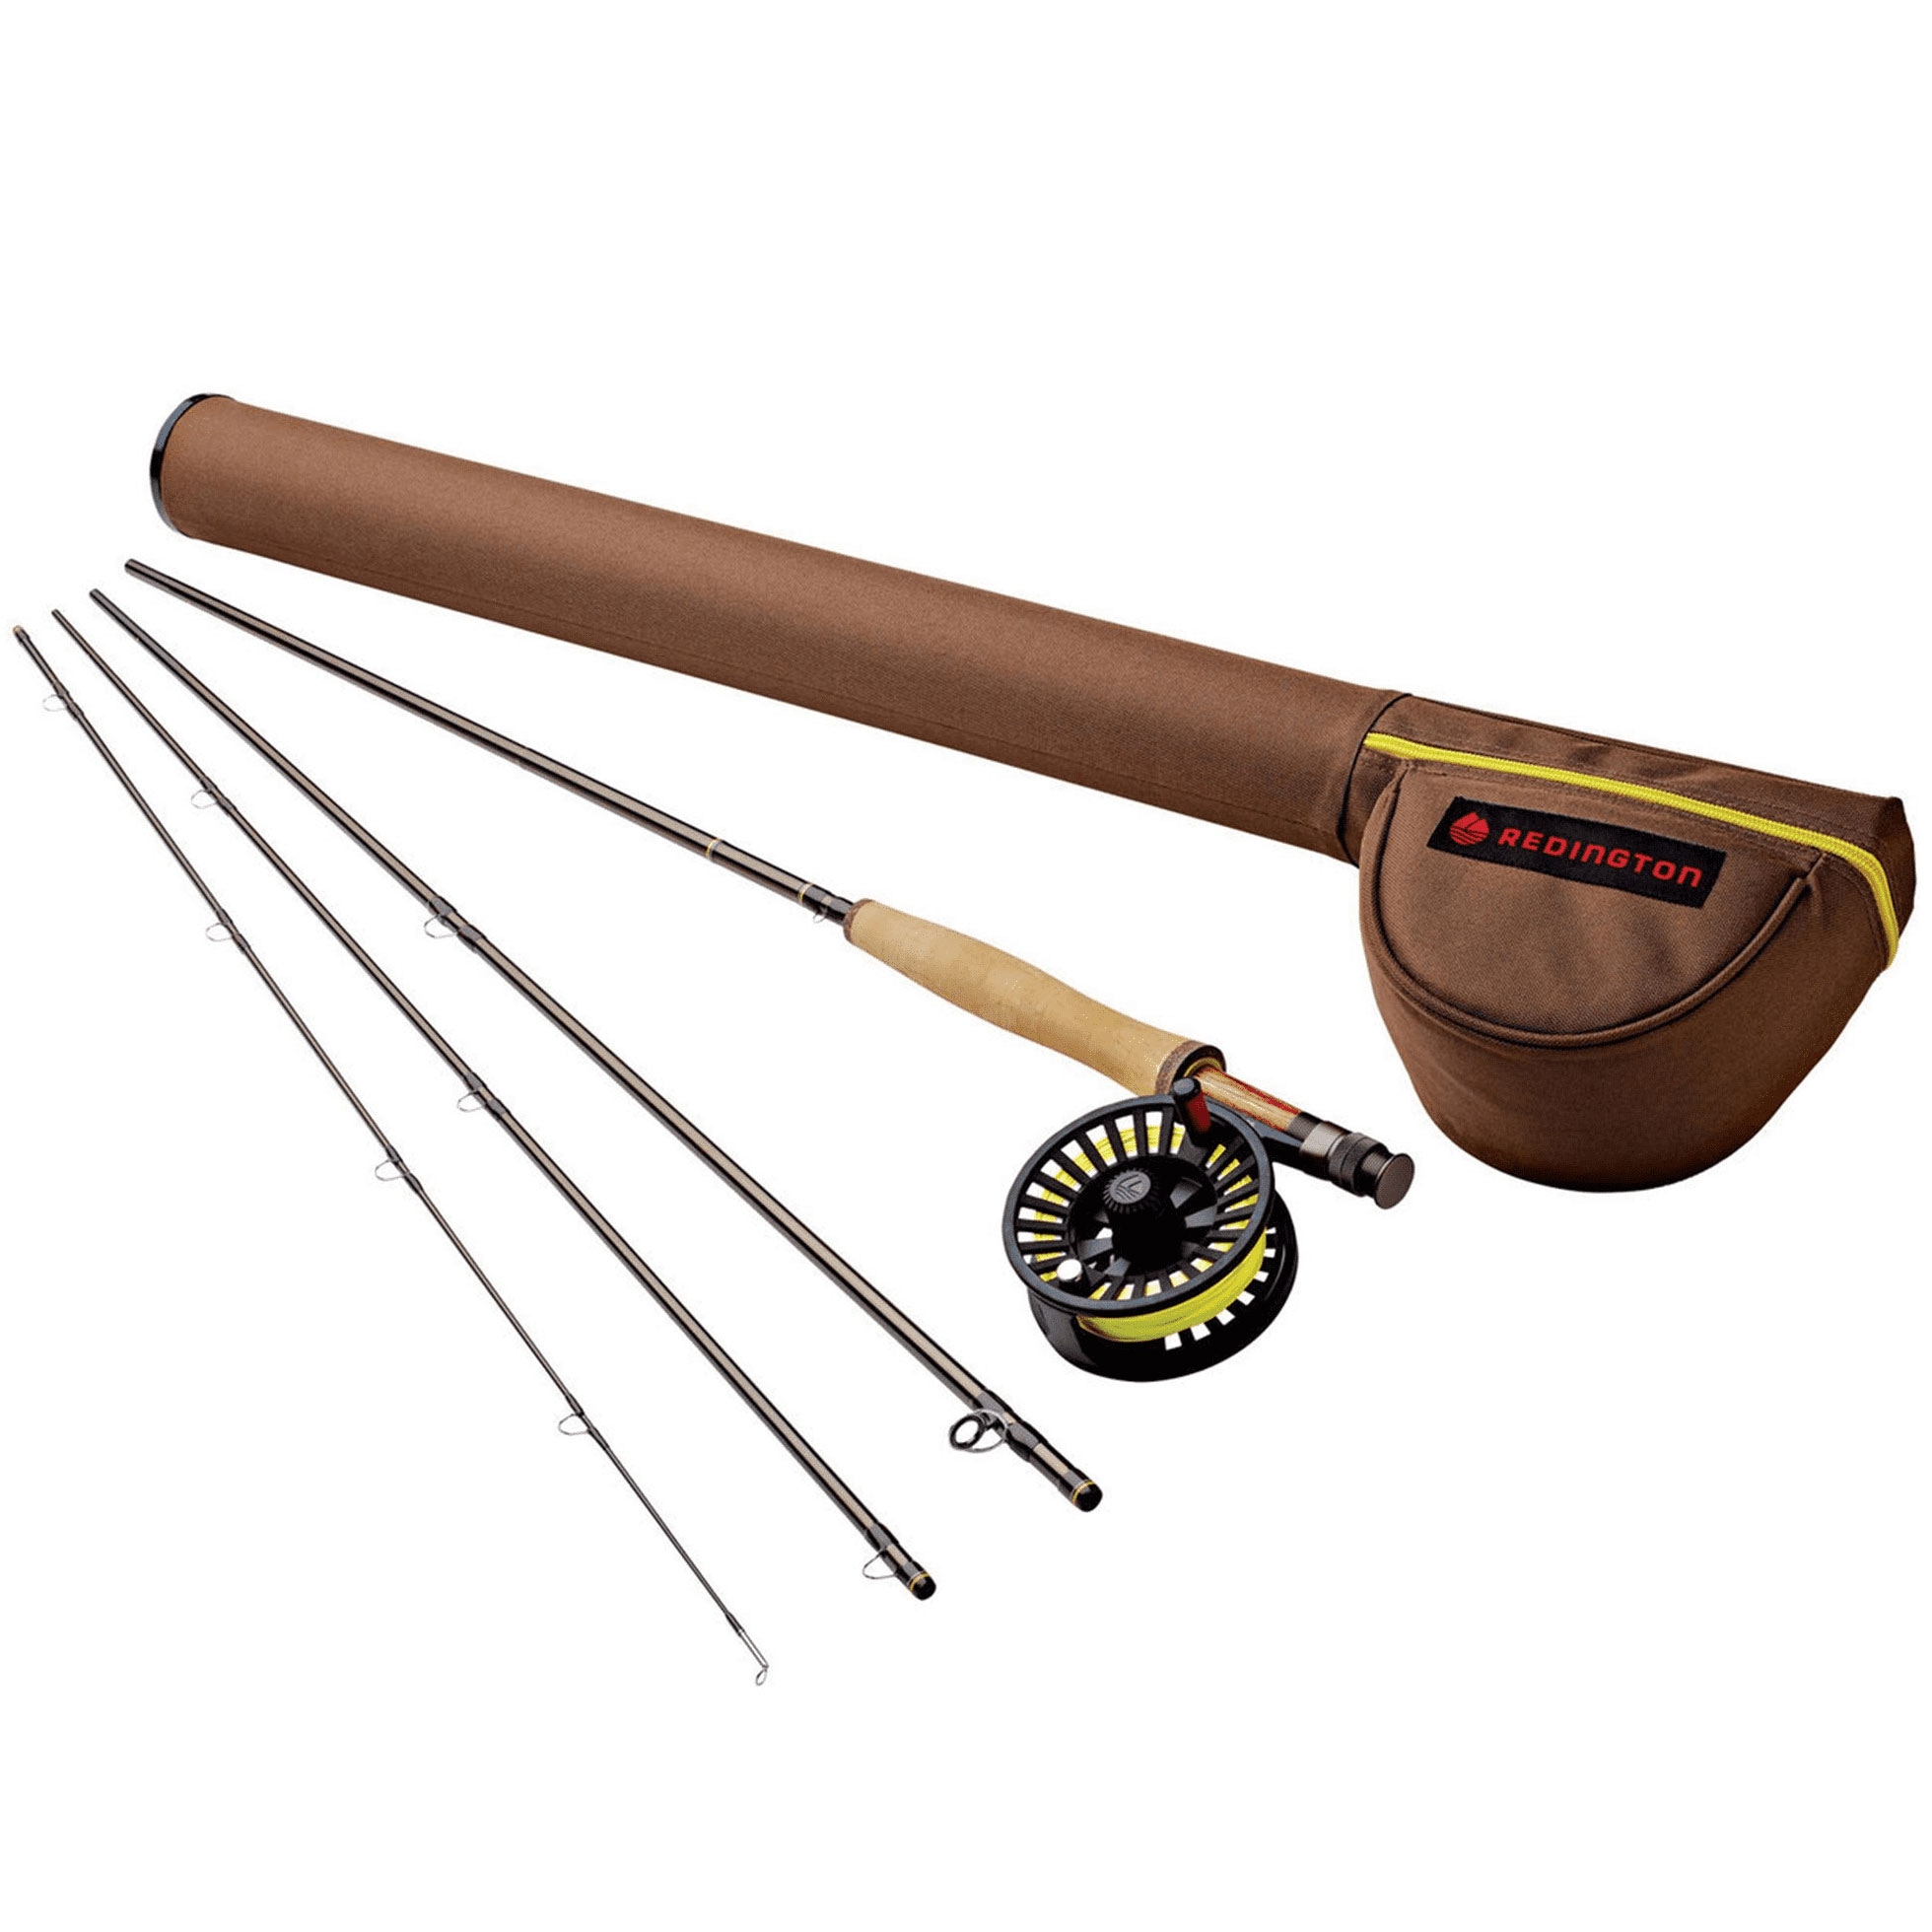 Redington All-Water Fly Fishing Rod and Reel Combo - Cordura Construction,  Brown Finish, 8.5ft Length, 5lb Line Weight in the Fishing Equipment  department at